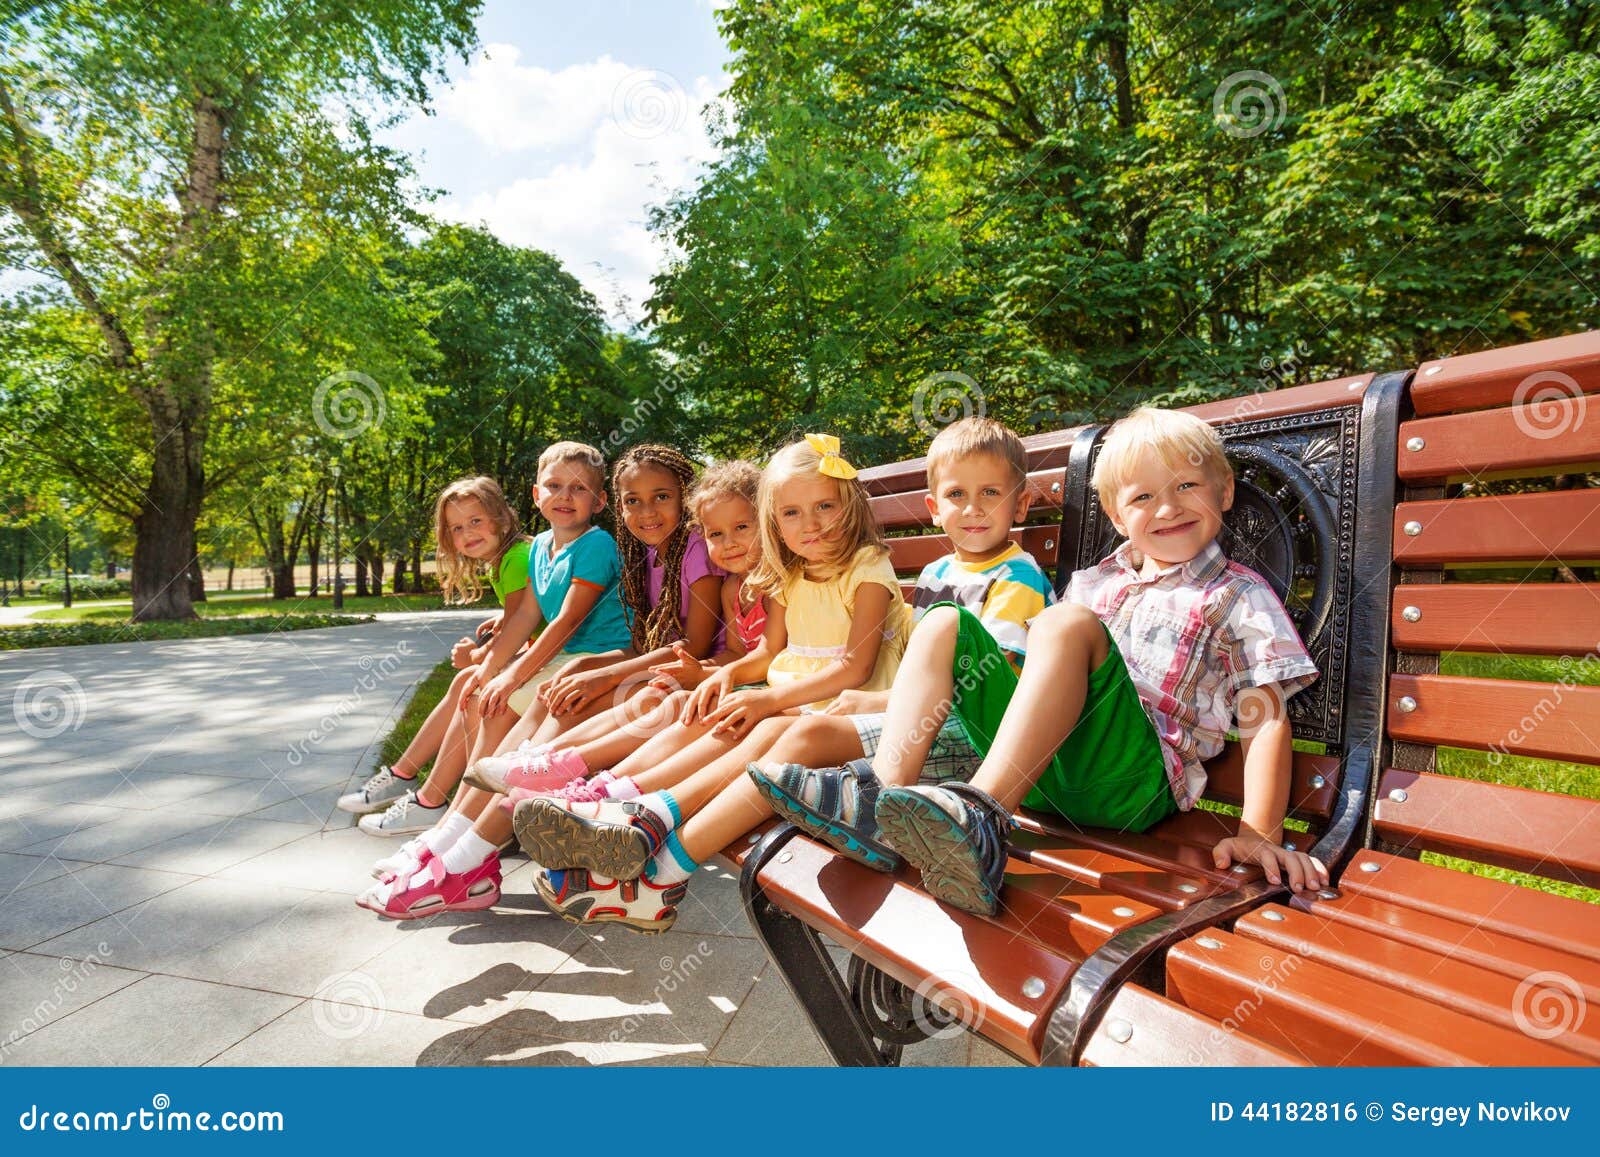 Group Or Kids Rest On Bench In Park Stock Photo - Image 